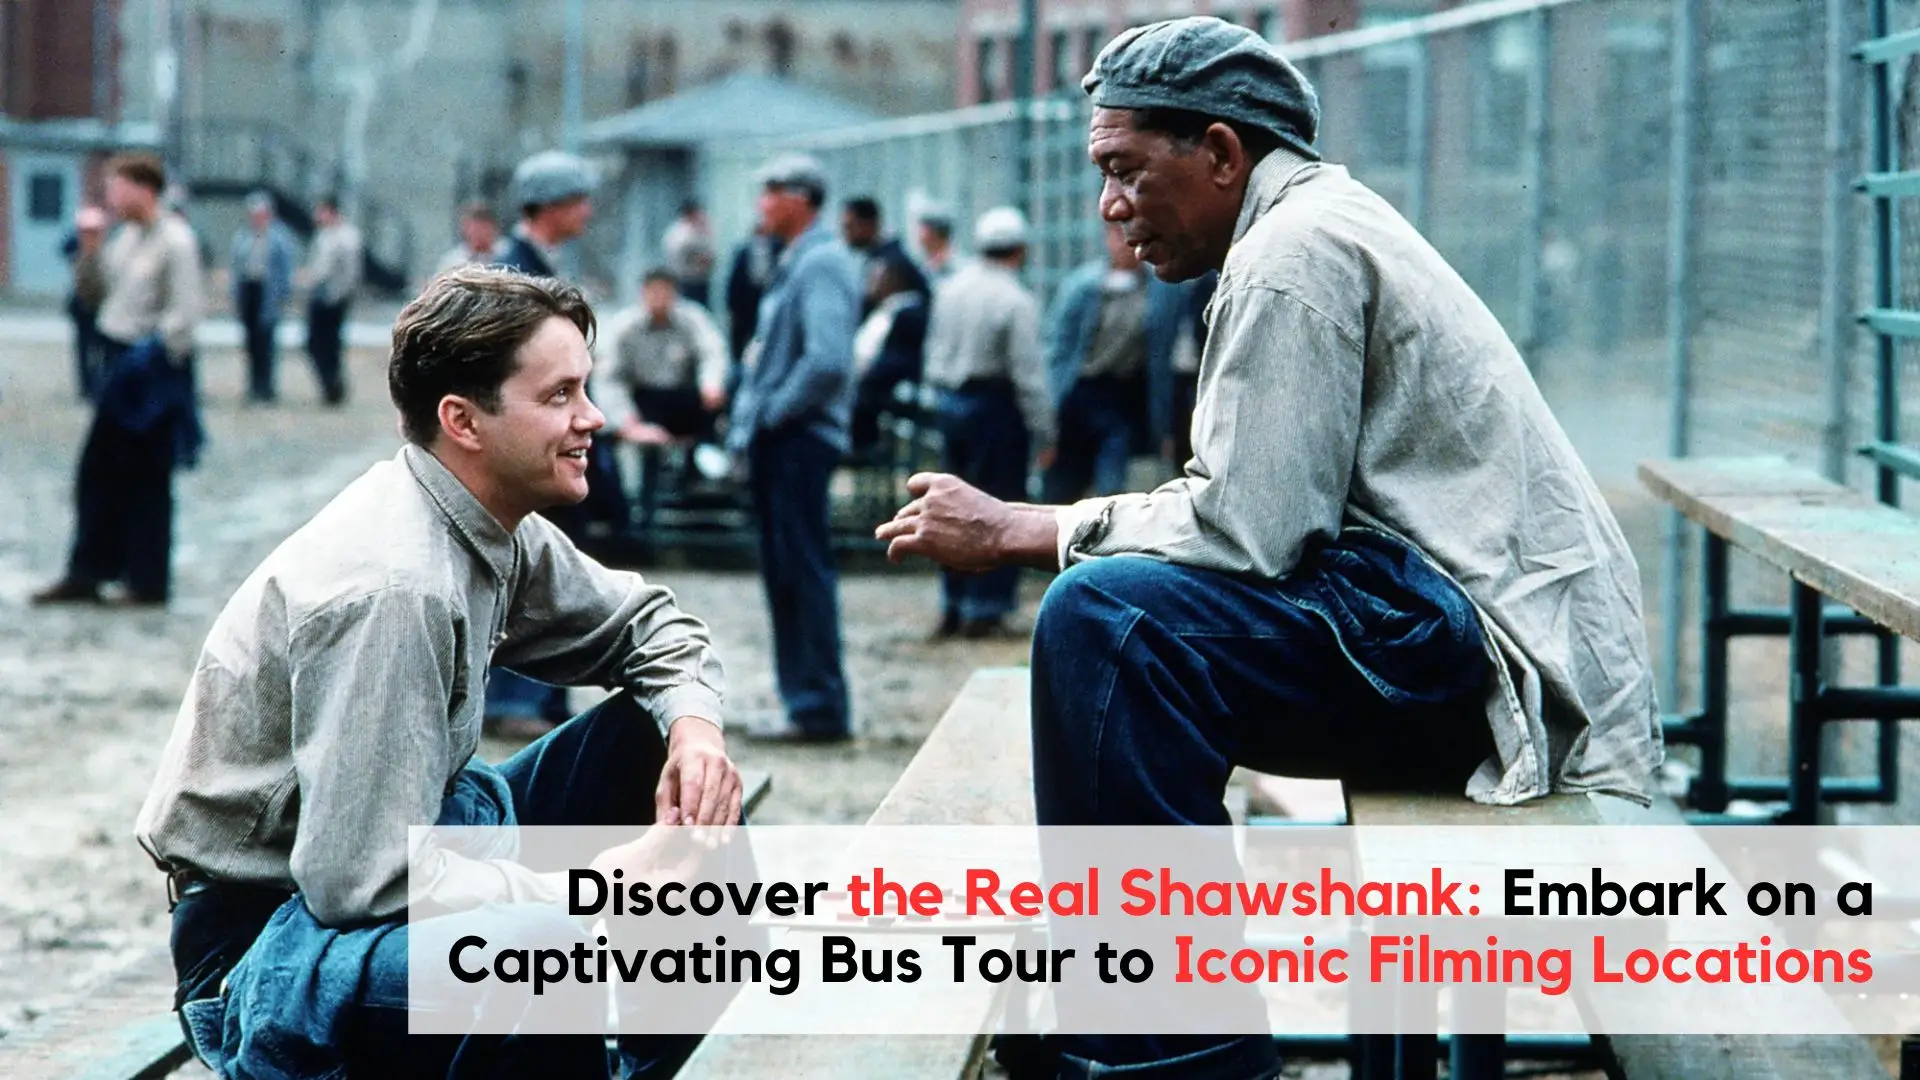 Discover the Real Shawshank: Embark on a Captivating Bus Tour to Iconic Filming Locations